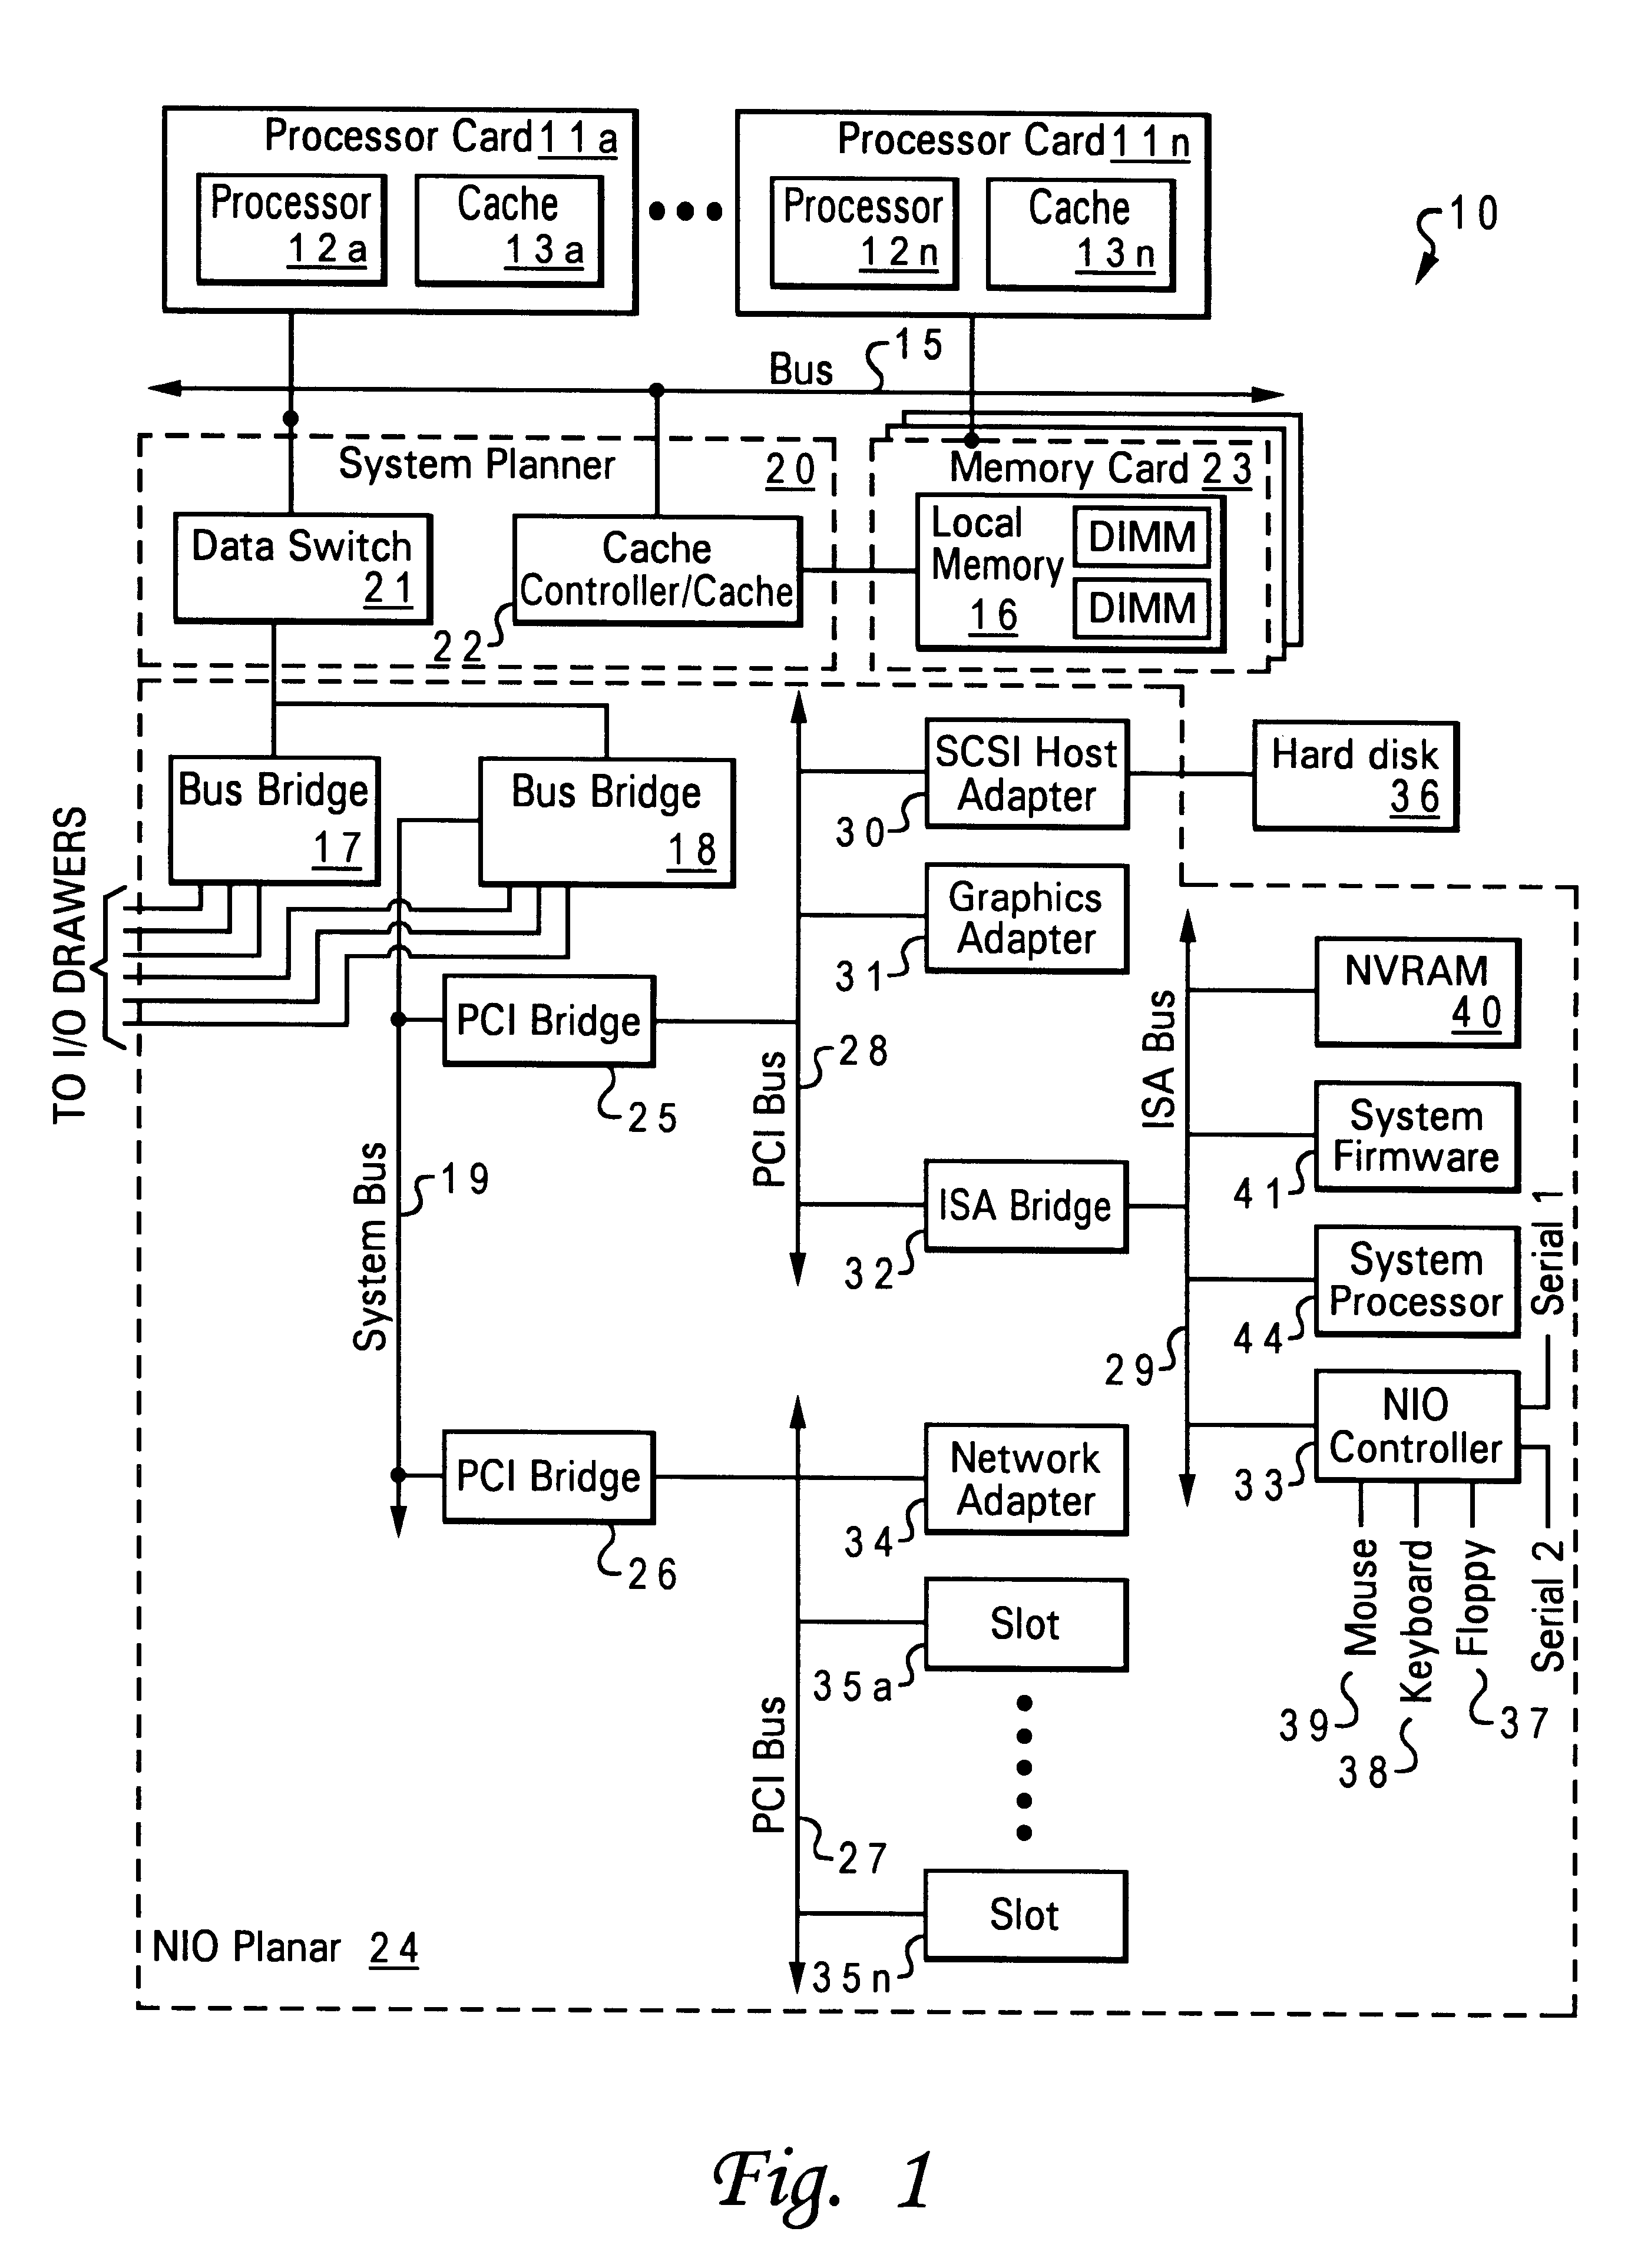 Method and apparatus for locating and displaying a defective component in a data processing system during a system startup using location and progress codes associated with the component